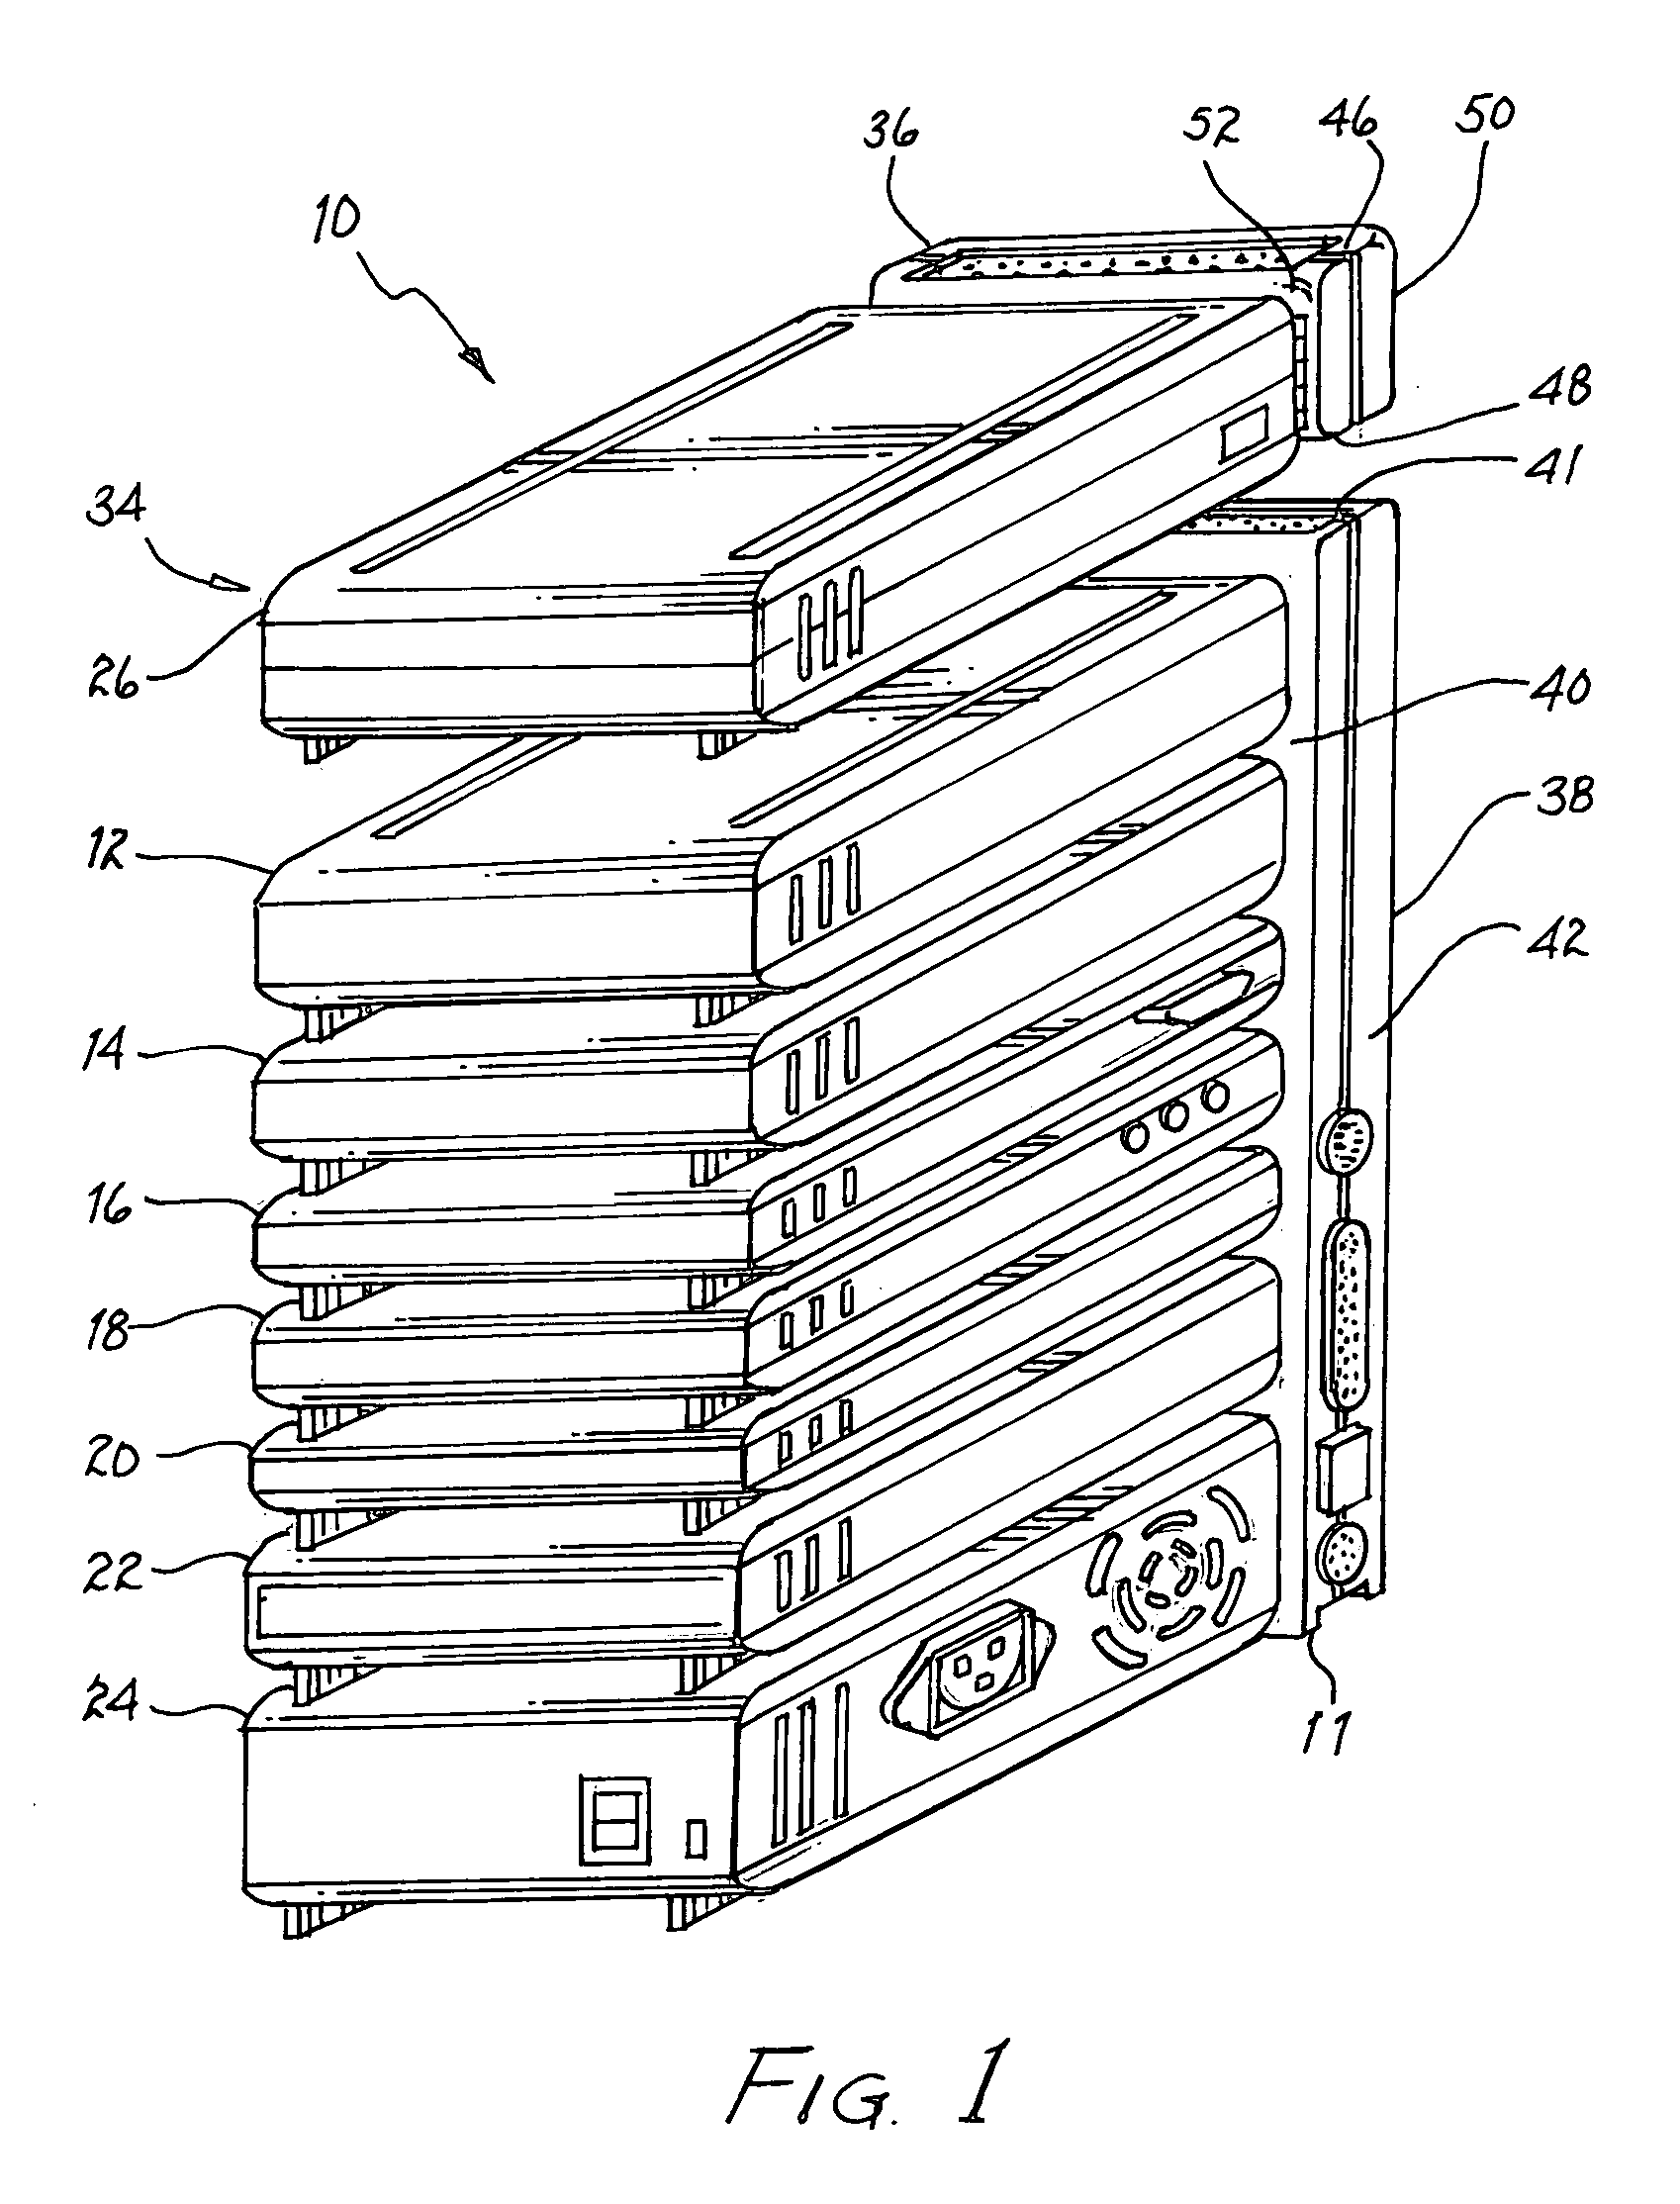 Modular computer system and components therefor